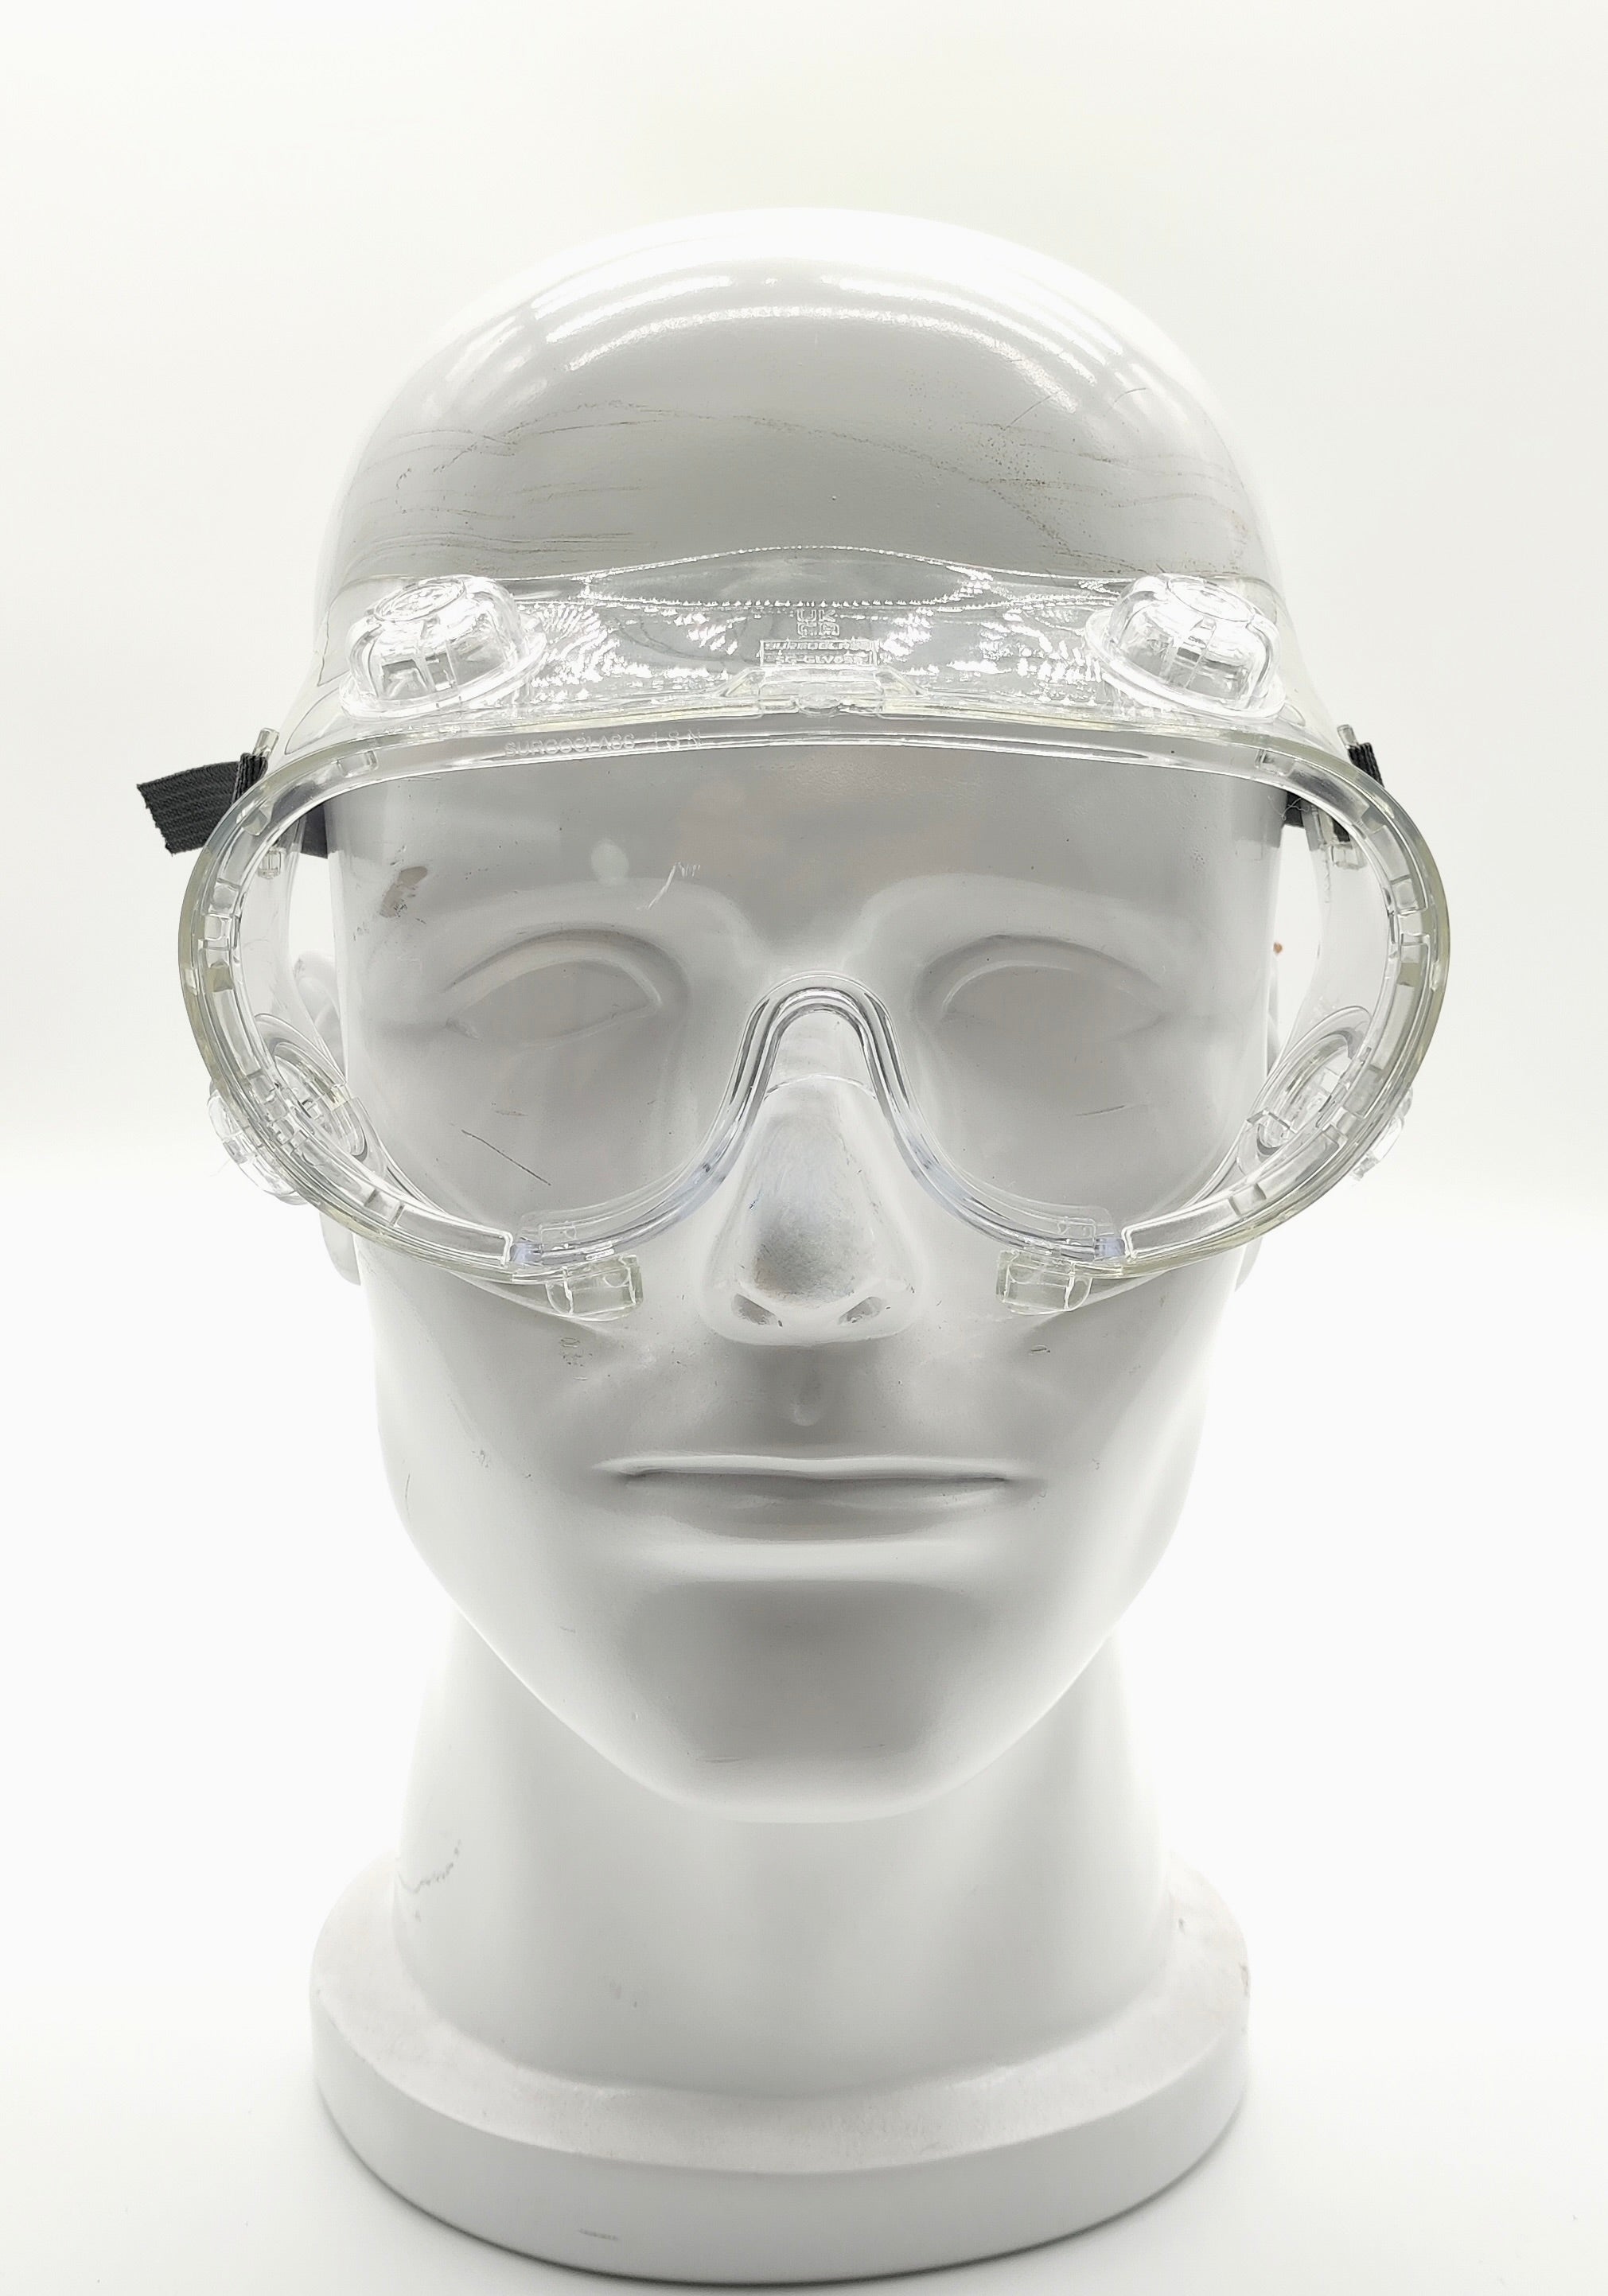 EN166:2001 Safety Goggles Adjustable Headband and Air Valves Anti Fog Anti UV Mirror Clear Vision PC and Medical PVC Universal Size individually Packed